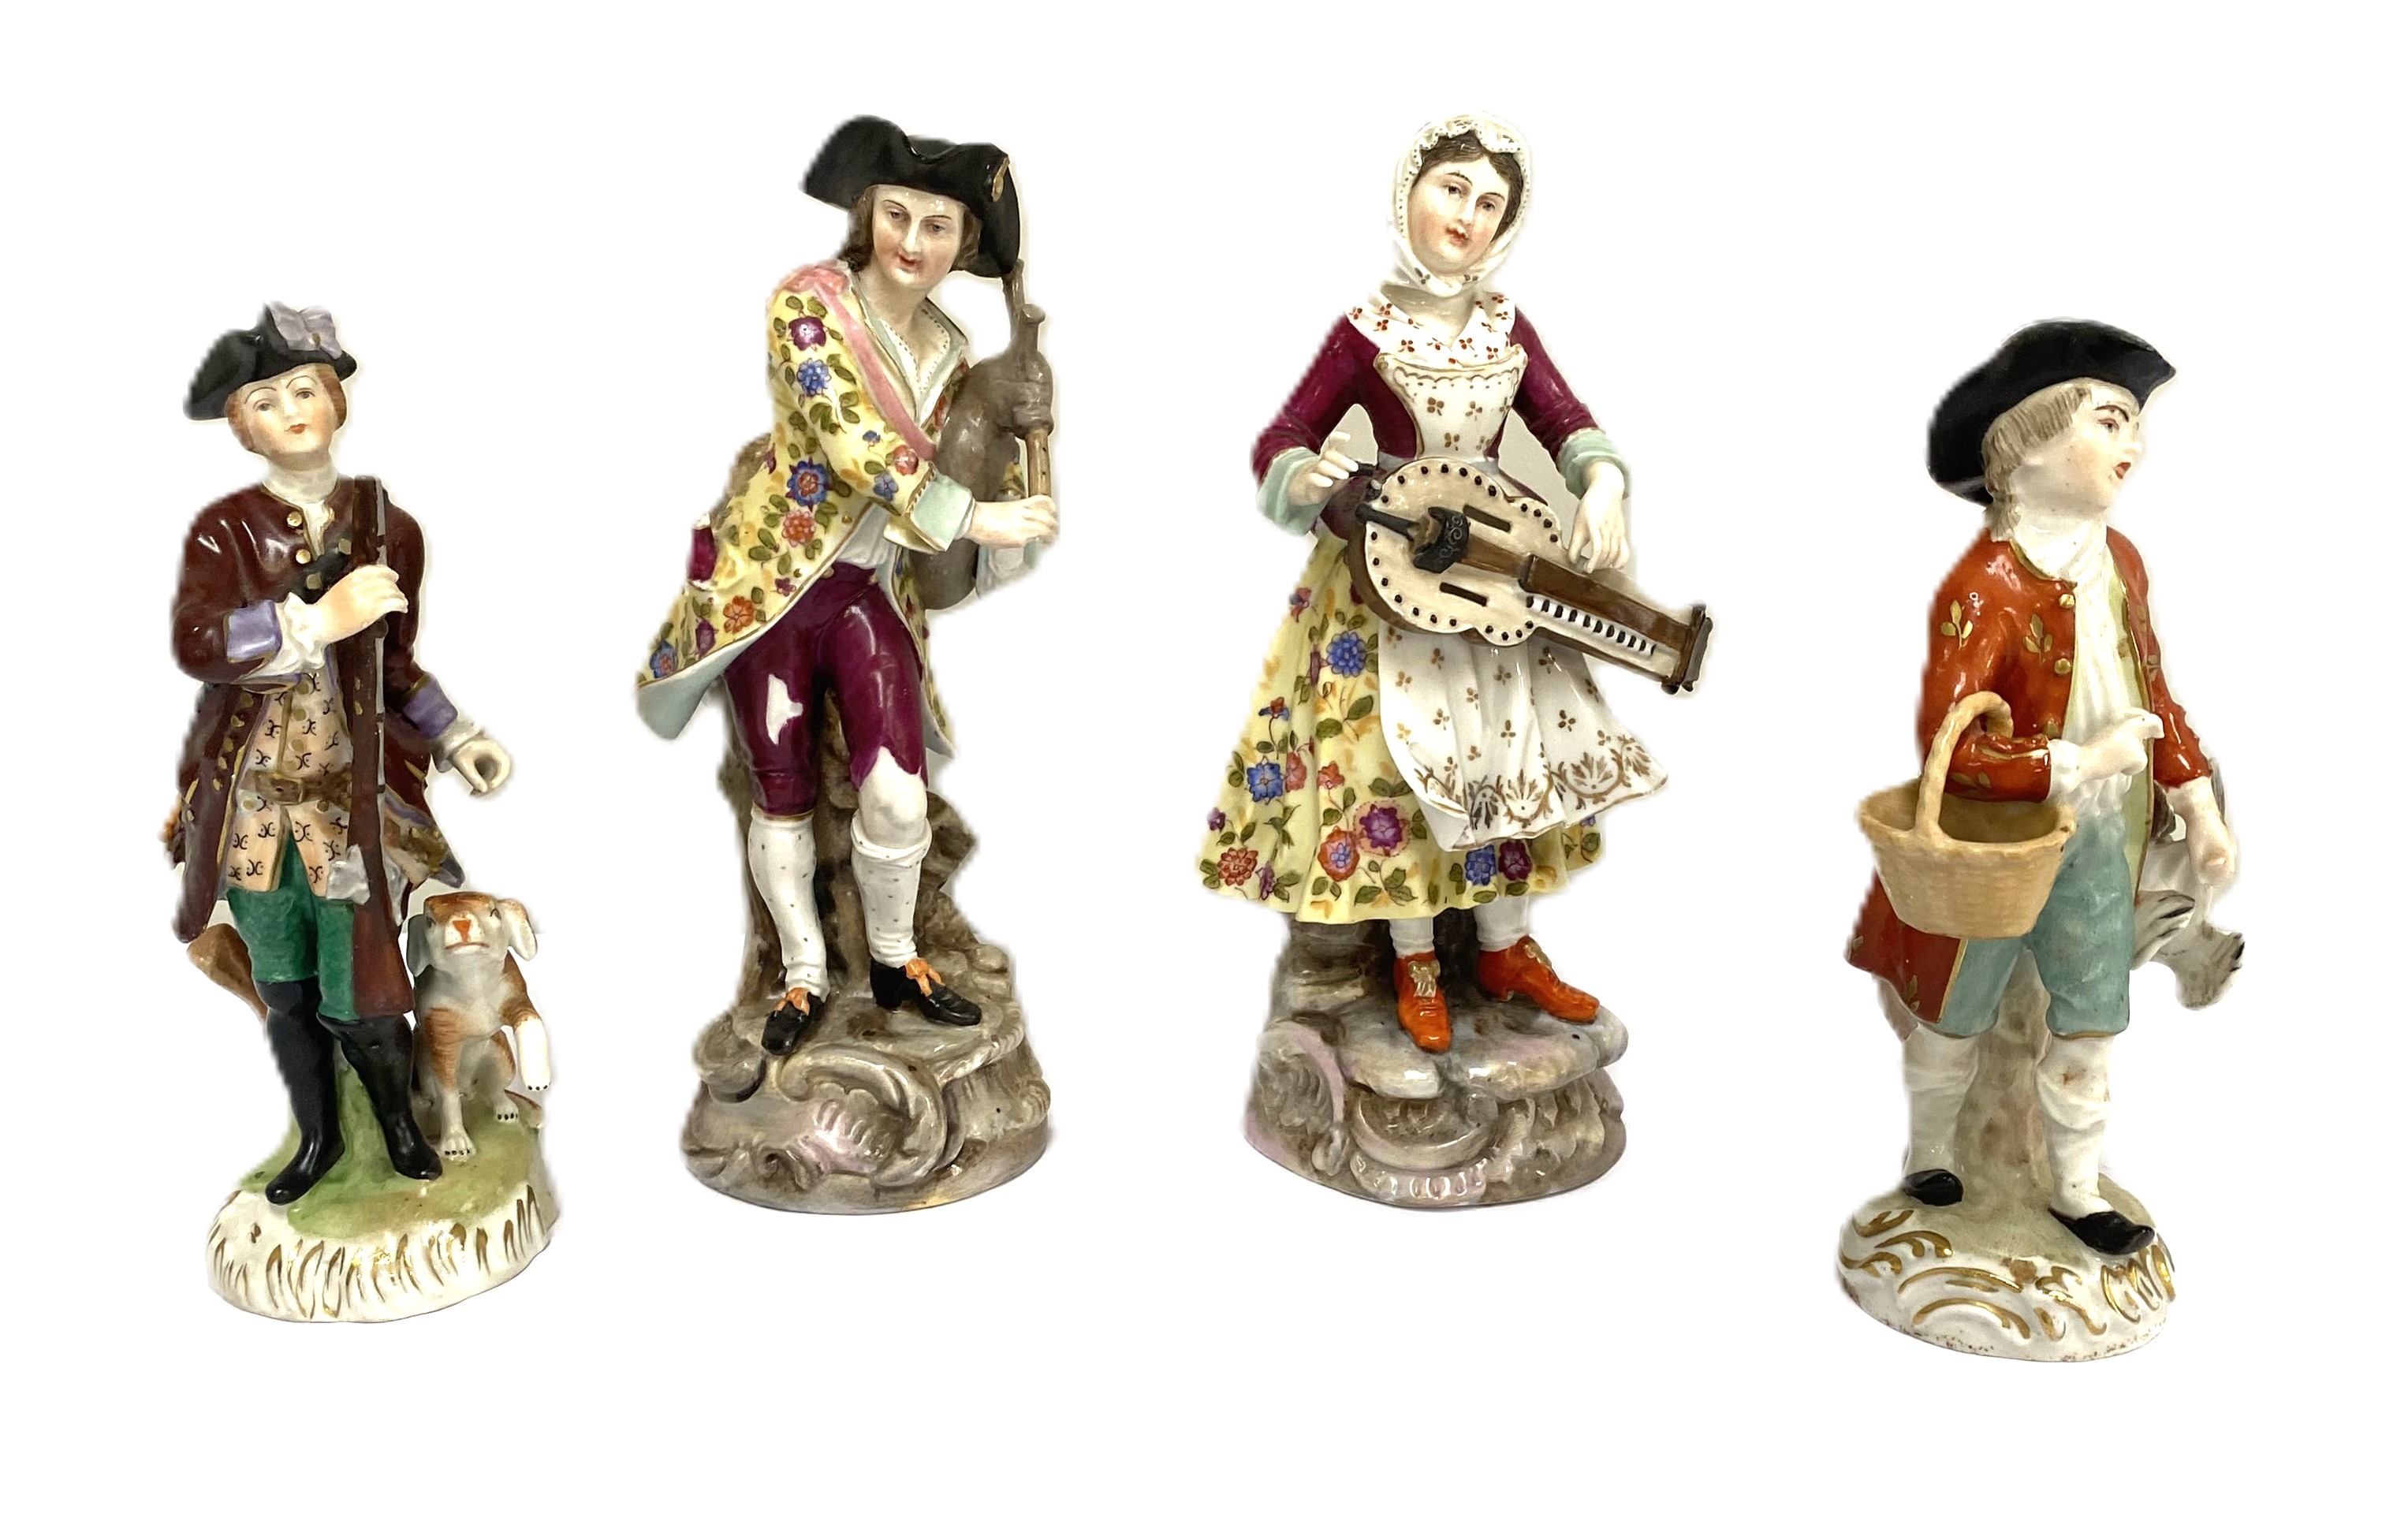 A pair of Dresden porcelain figures of a Lady and Gallant, dressed for hunting, she with a musket